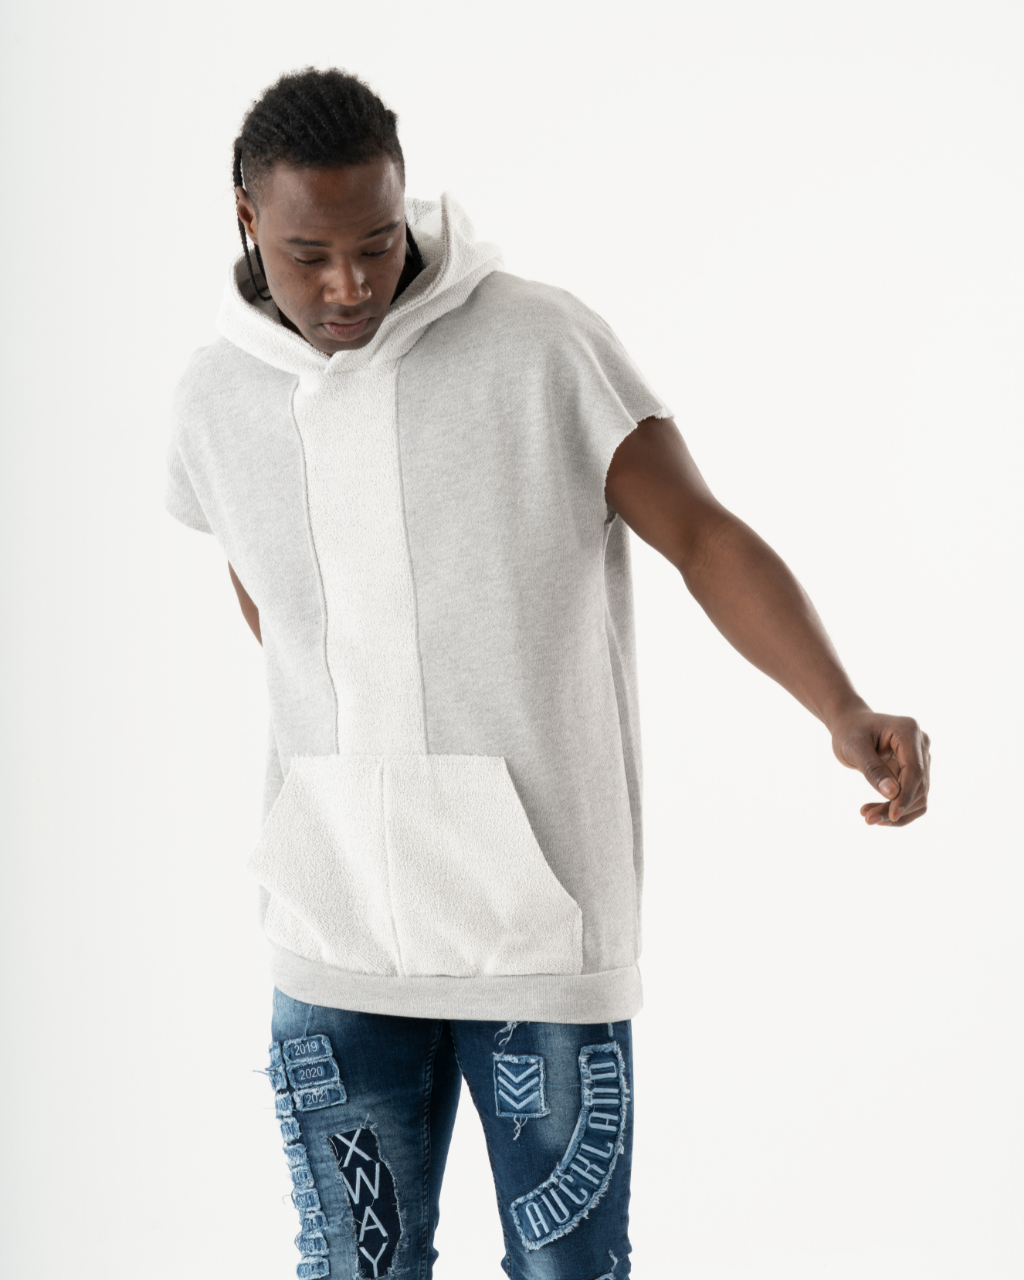 A man wearing a comfortable BACHELOR HOODIE | WHITE.